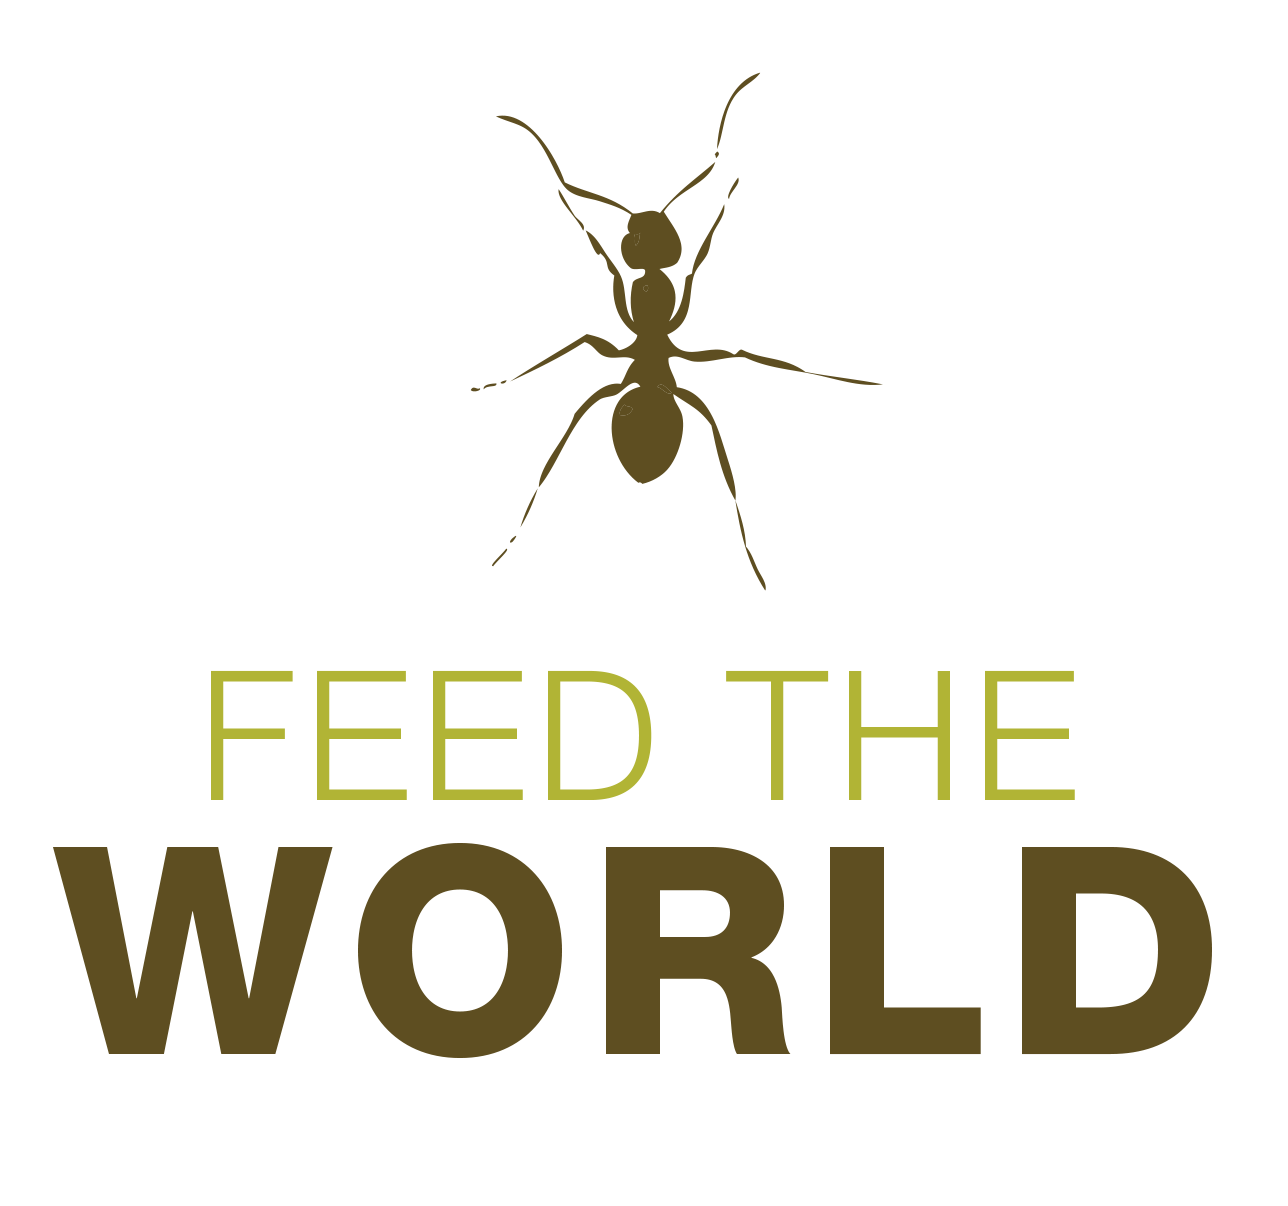 Insects to Feed The World